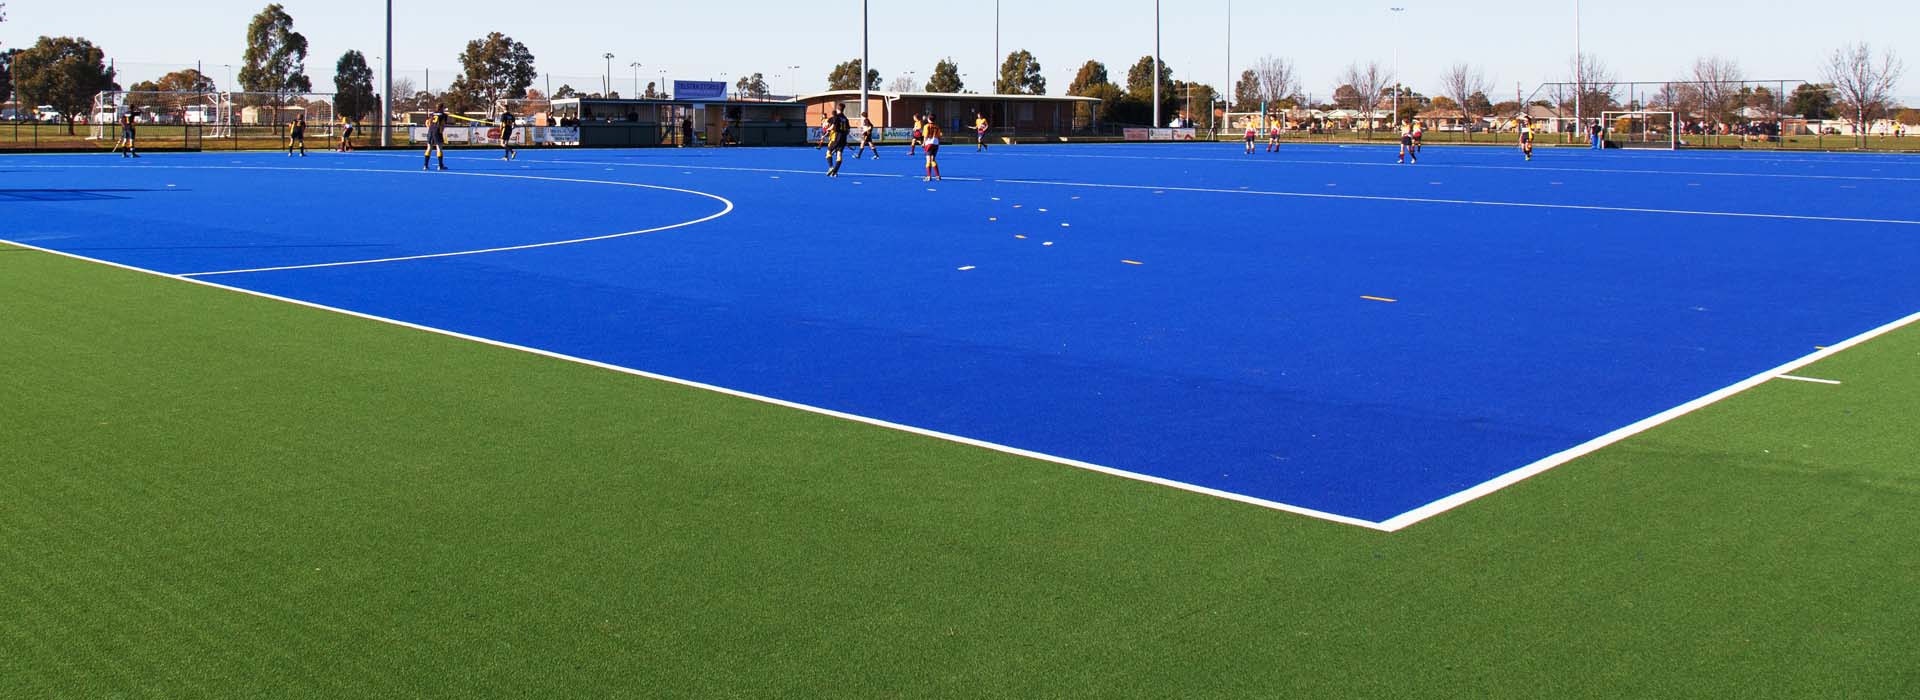 HIGH PERFORMANCE ARTIFICIAL TURF FOR HOCKEY